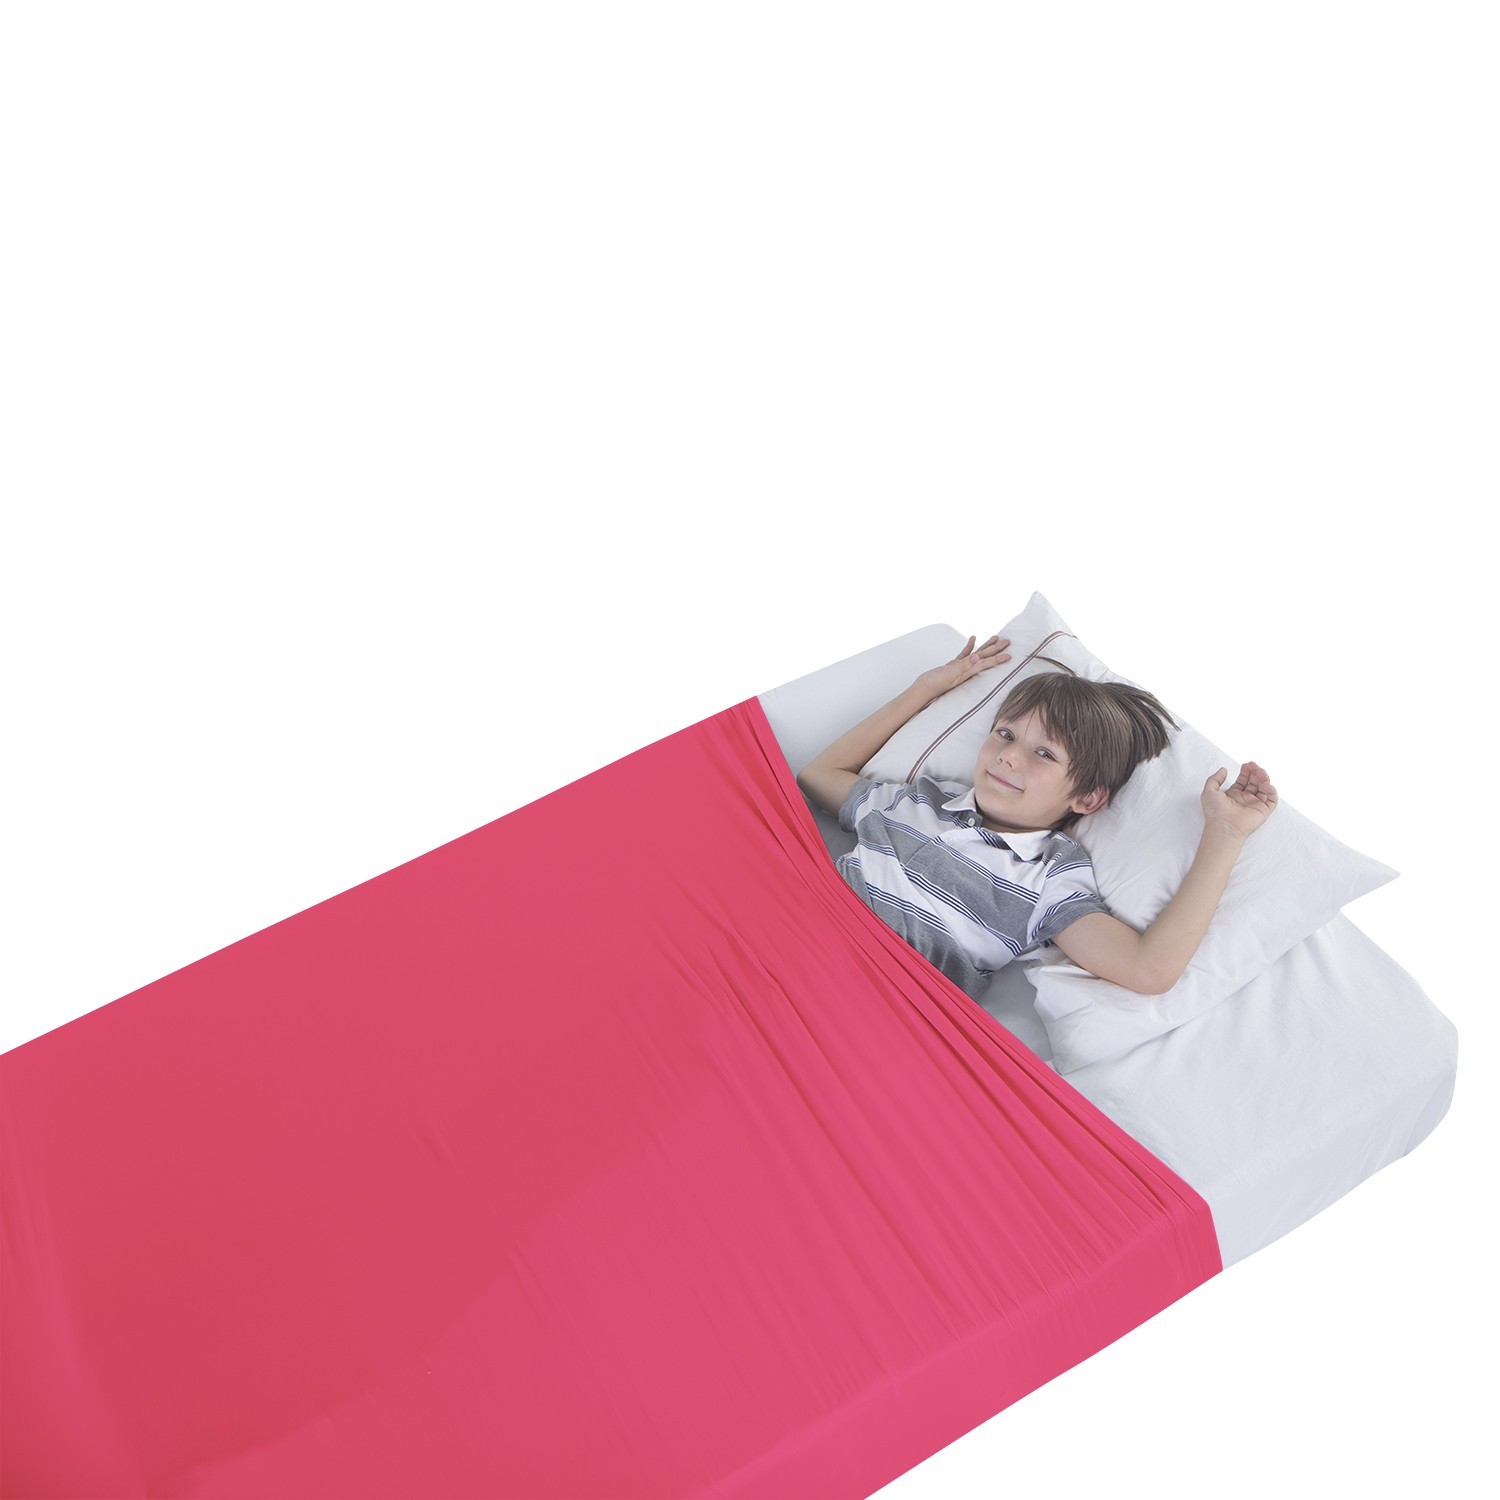 Gafly Sensory Compression Blanket, for Kids, Toddlers, and Adults - Best  Alternative to Weighted Blankets - Cool, Stretchy, Breathable Sheets in  Light